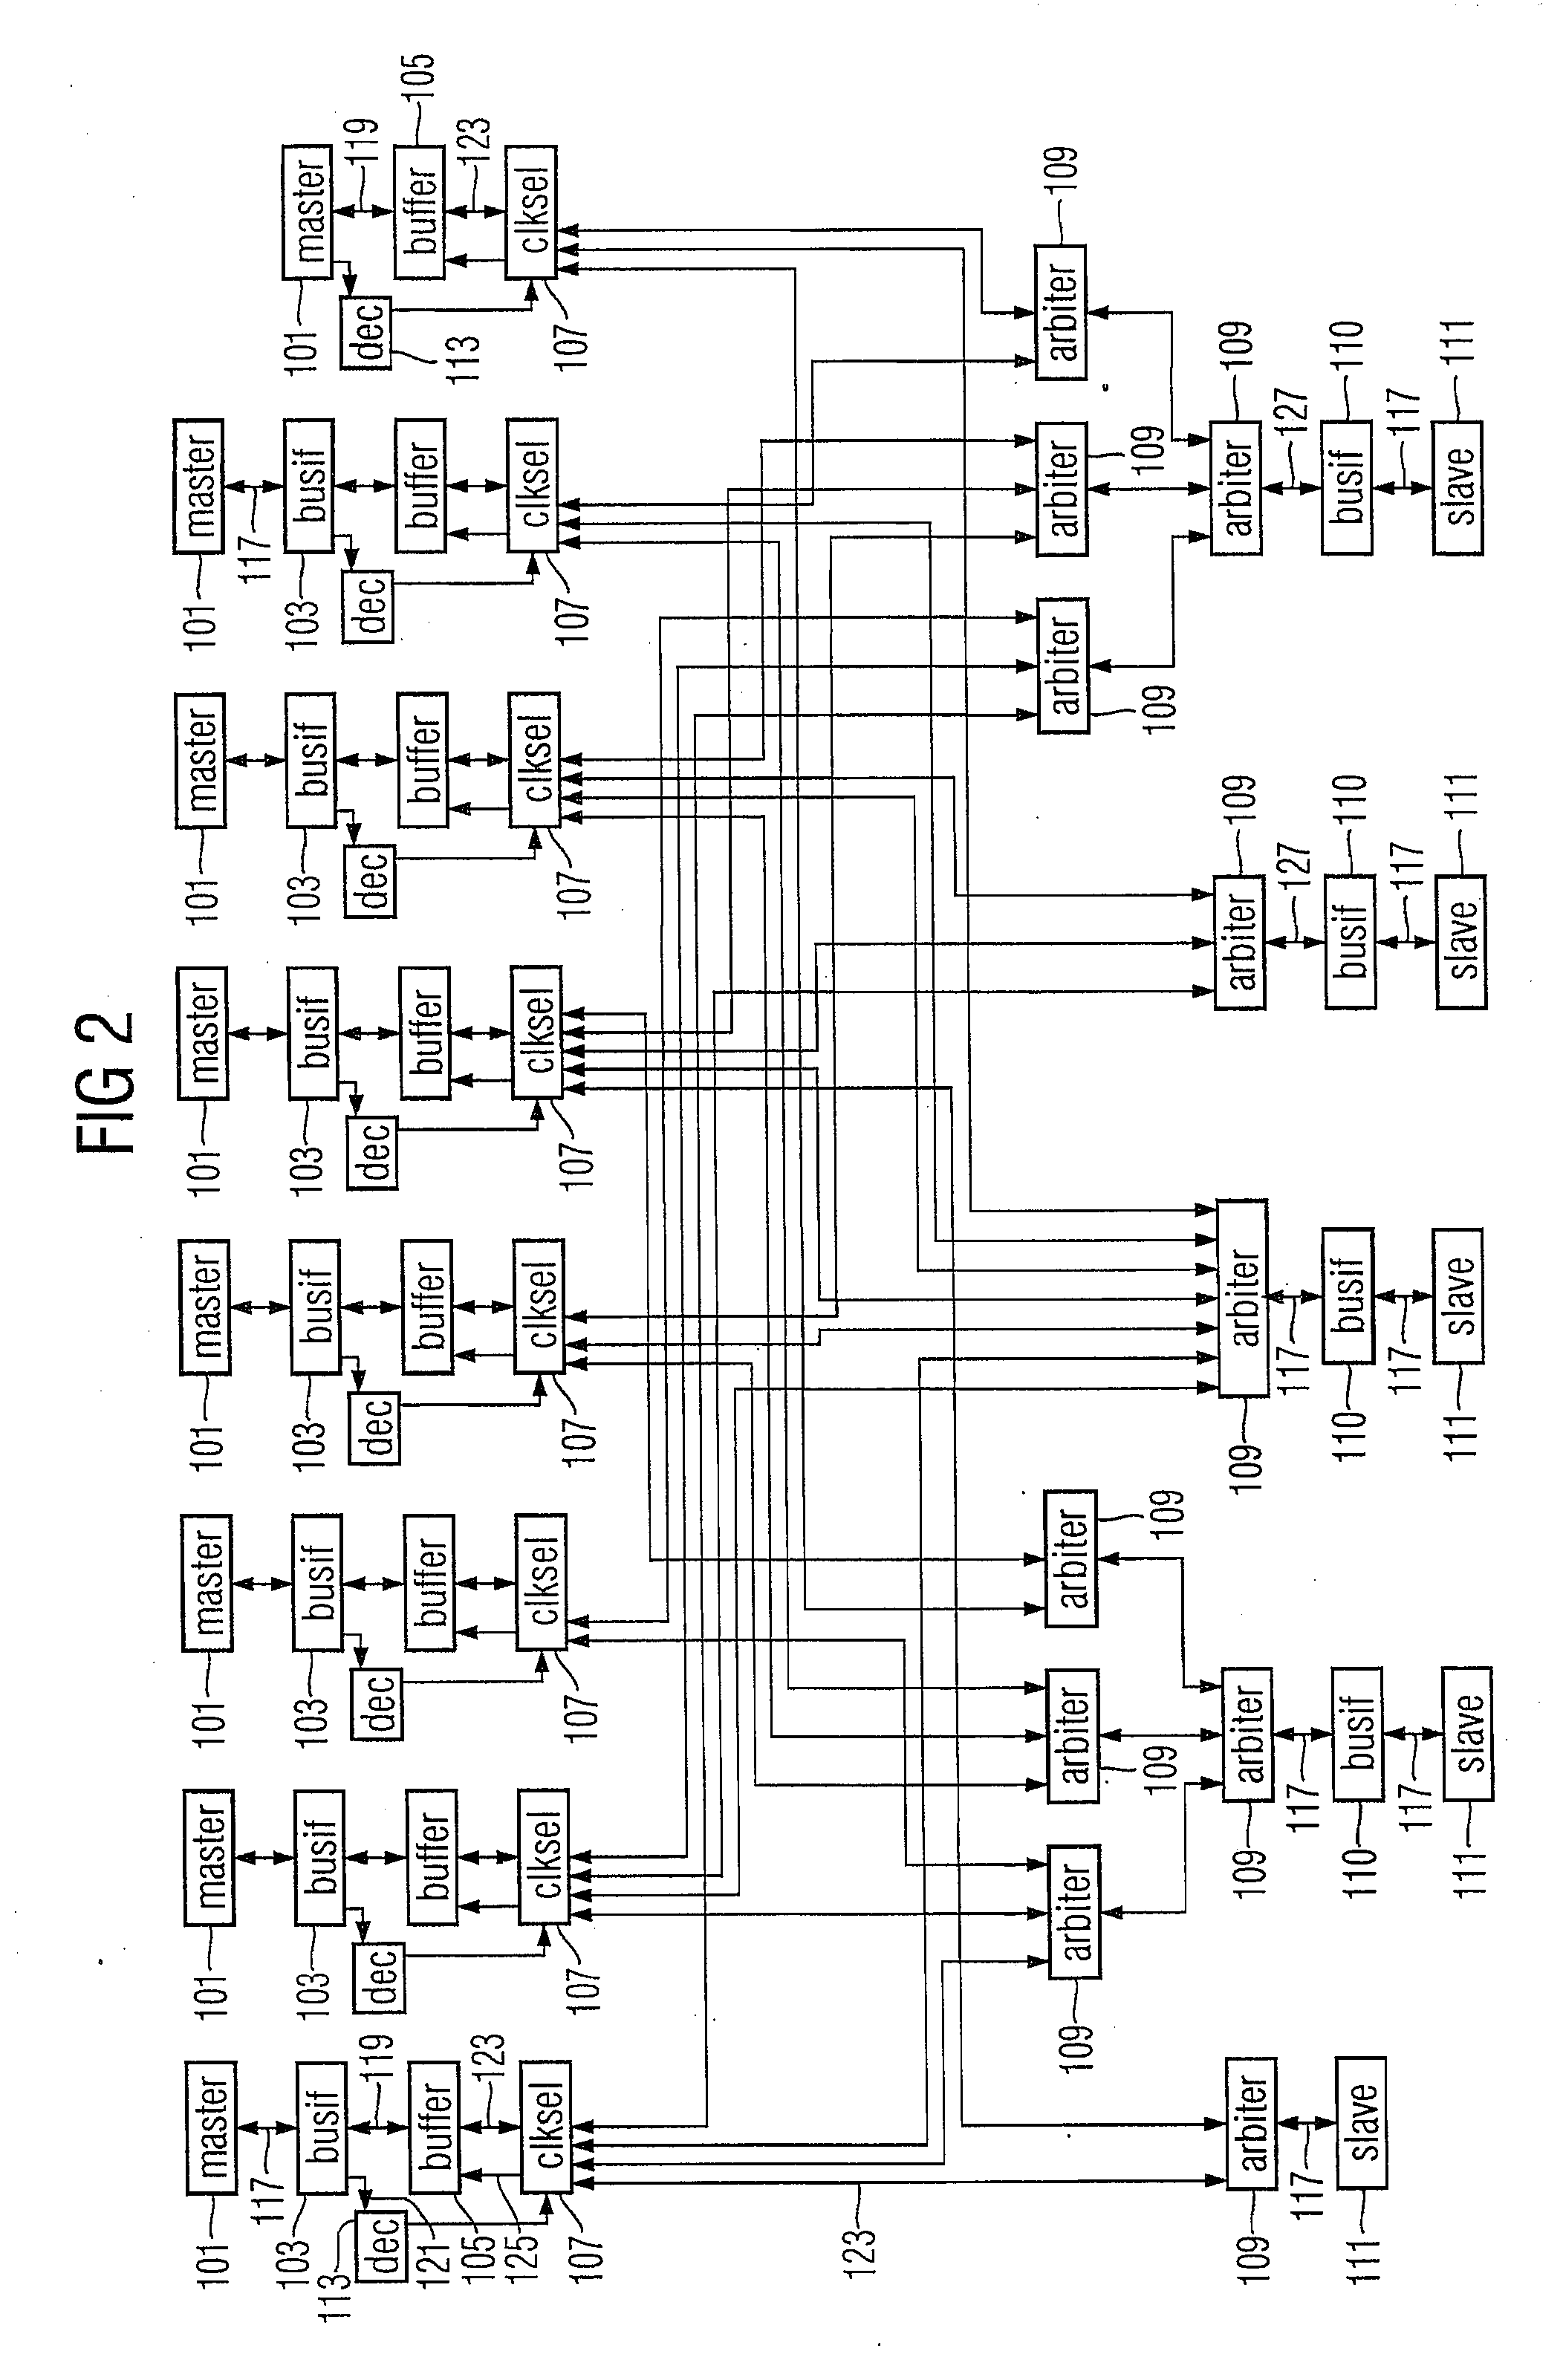 Memory and Memory Communication System